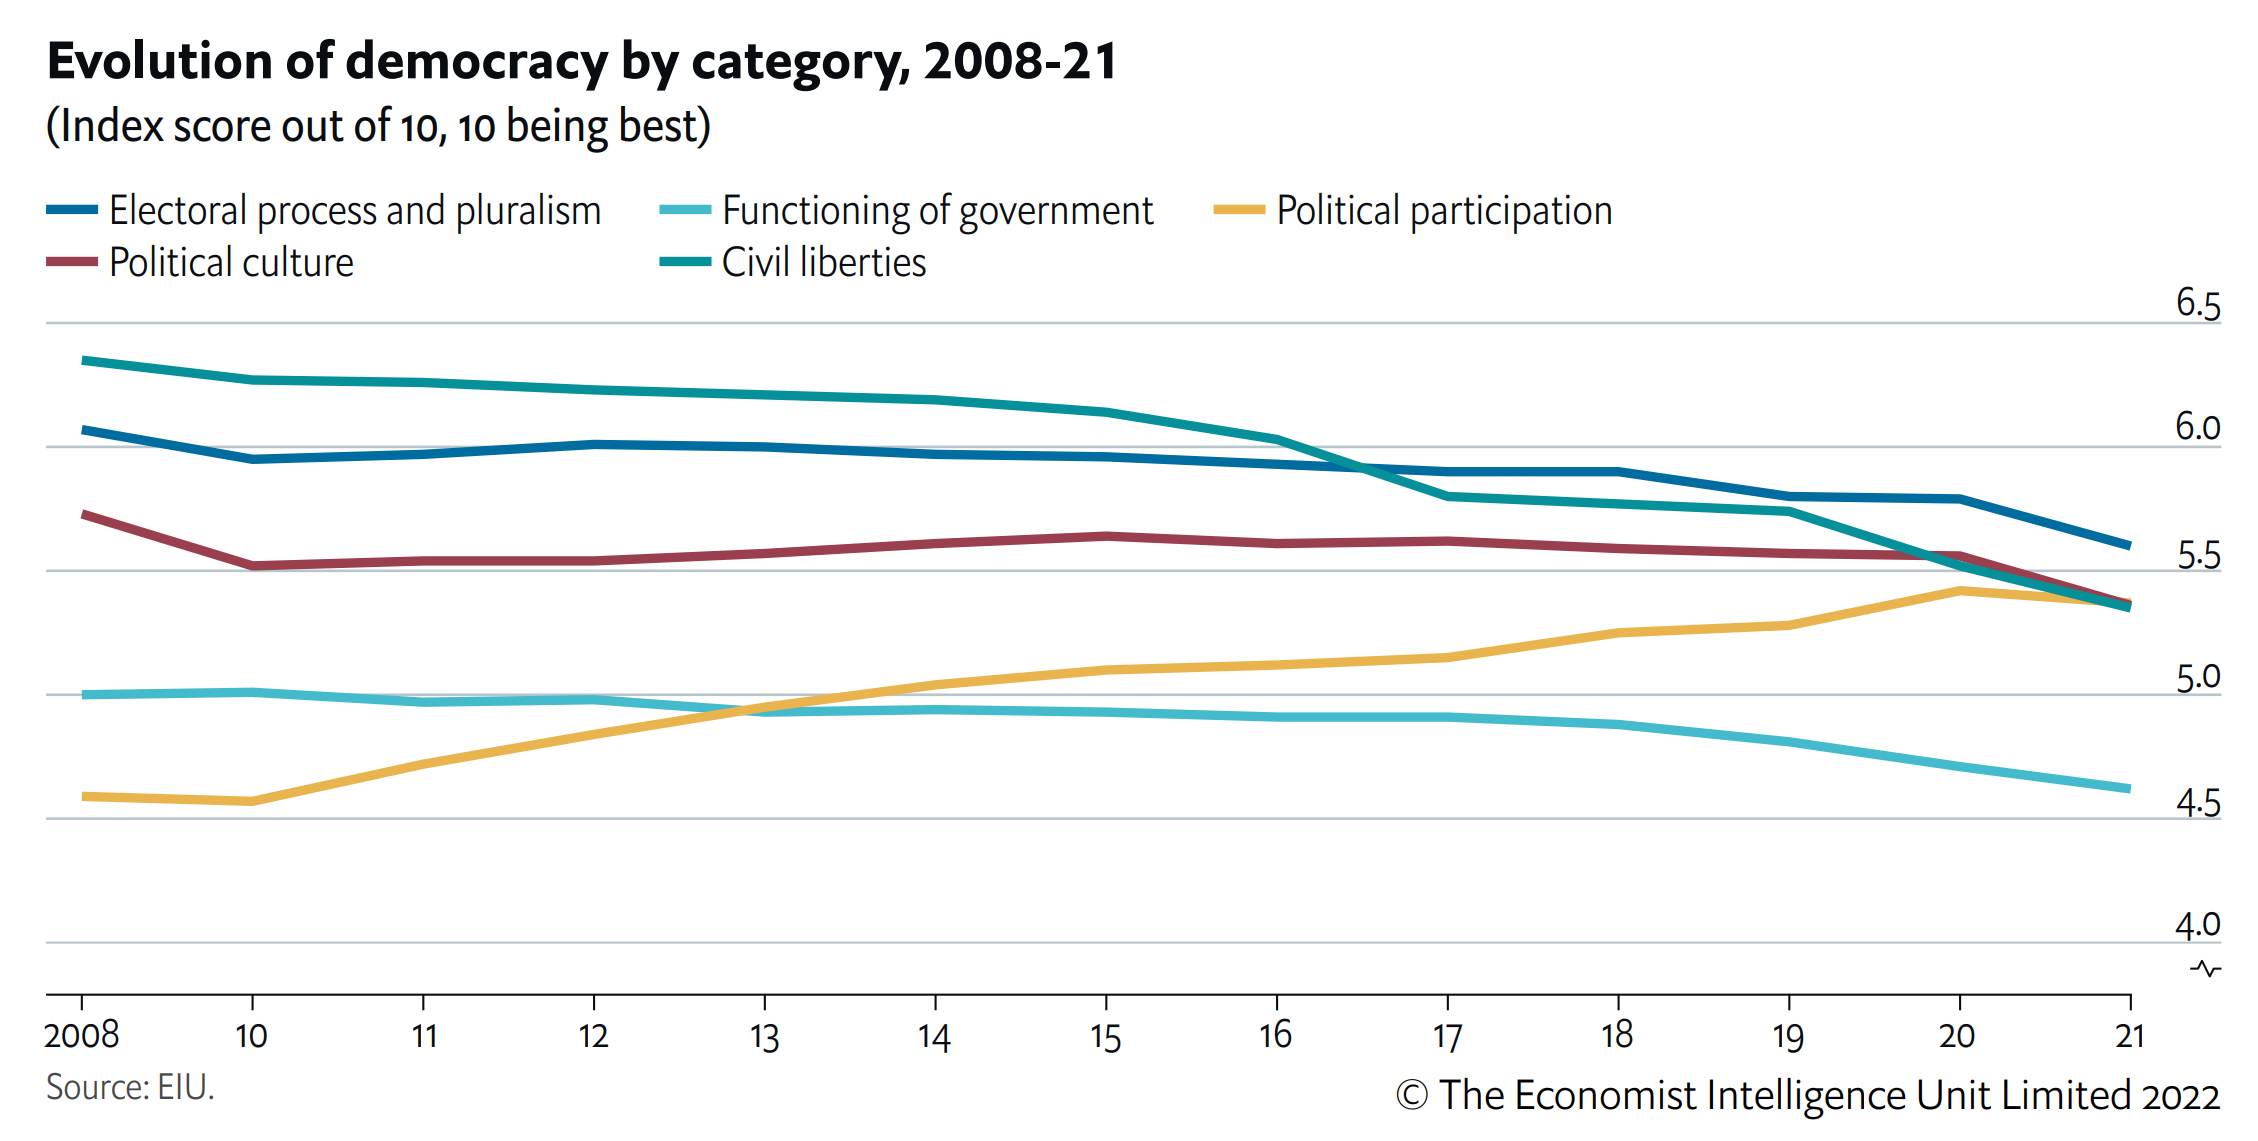 Evolution of democracy by category, 2008-2021. The EIU Democracy Index score ranges from 0 to 10, with 10 being best. this chart shows what has happened to the average global score across the five categories of the index between 2008 — before the global financial crisis — and 2021. The categories that have recorded the biggest deterioration in global terms are civil liberties (-1.00 on a 0-10 scale) and electoral process and pluralism (-0.47). Suggesting a possible correlation, functioning of government and political culture both recorded a very similar decline in their average global scores (-0.38 and -0.37 respectively). Graphic: EIU